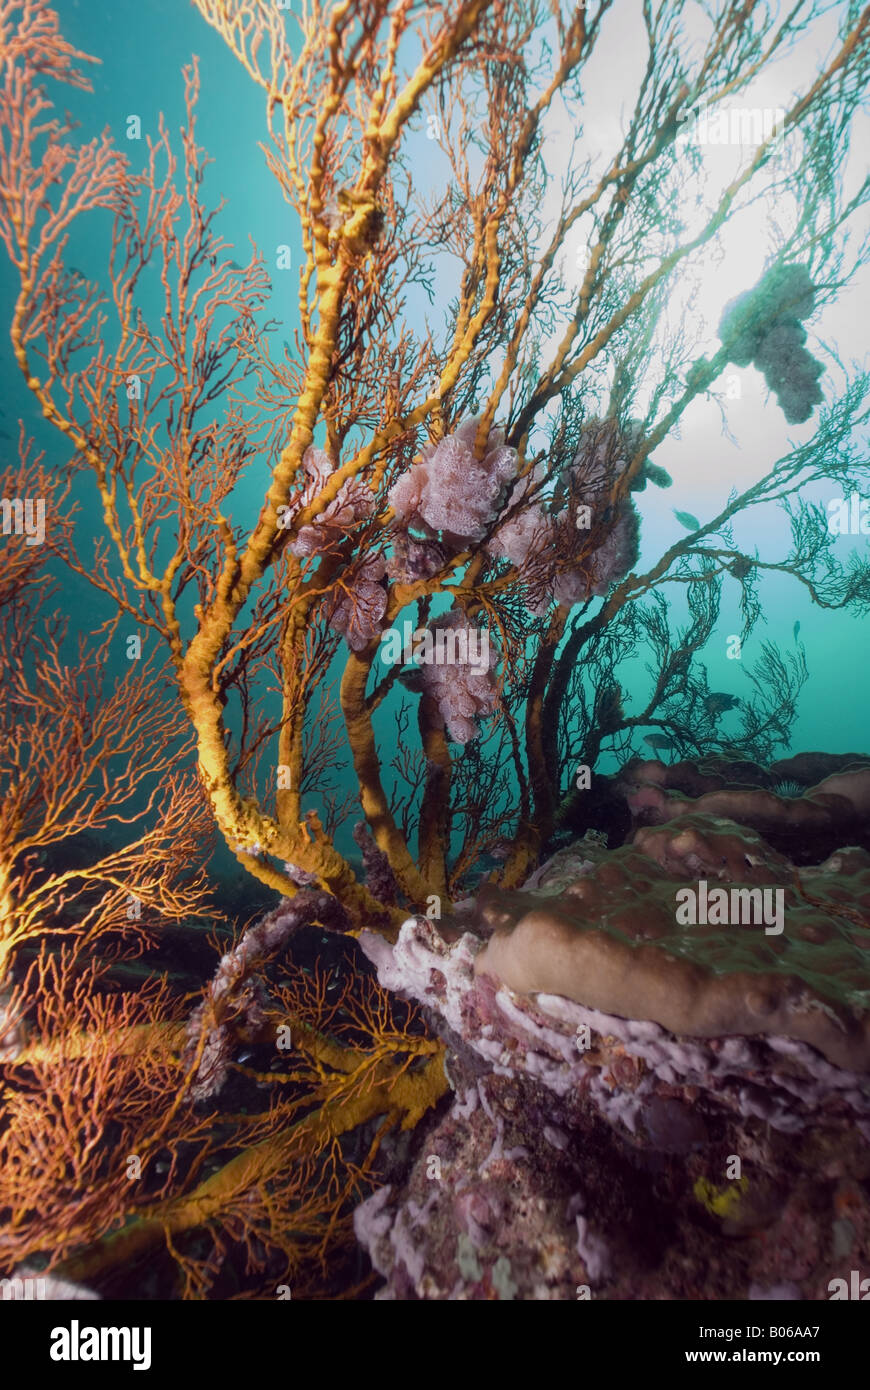 Gorgonians on a coralreef with sponges growing on the sea fan and a sunburst coming through the blue water under water Stock Photo